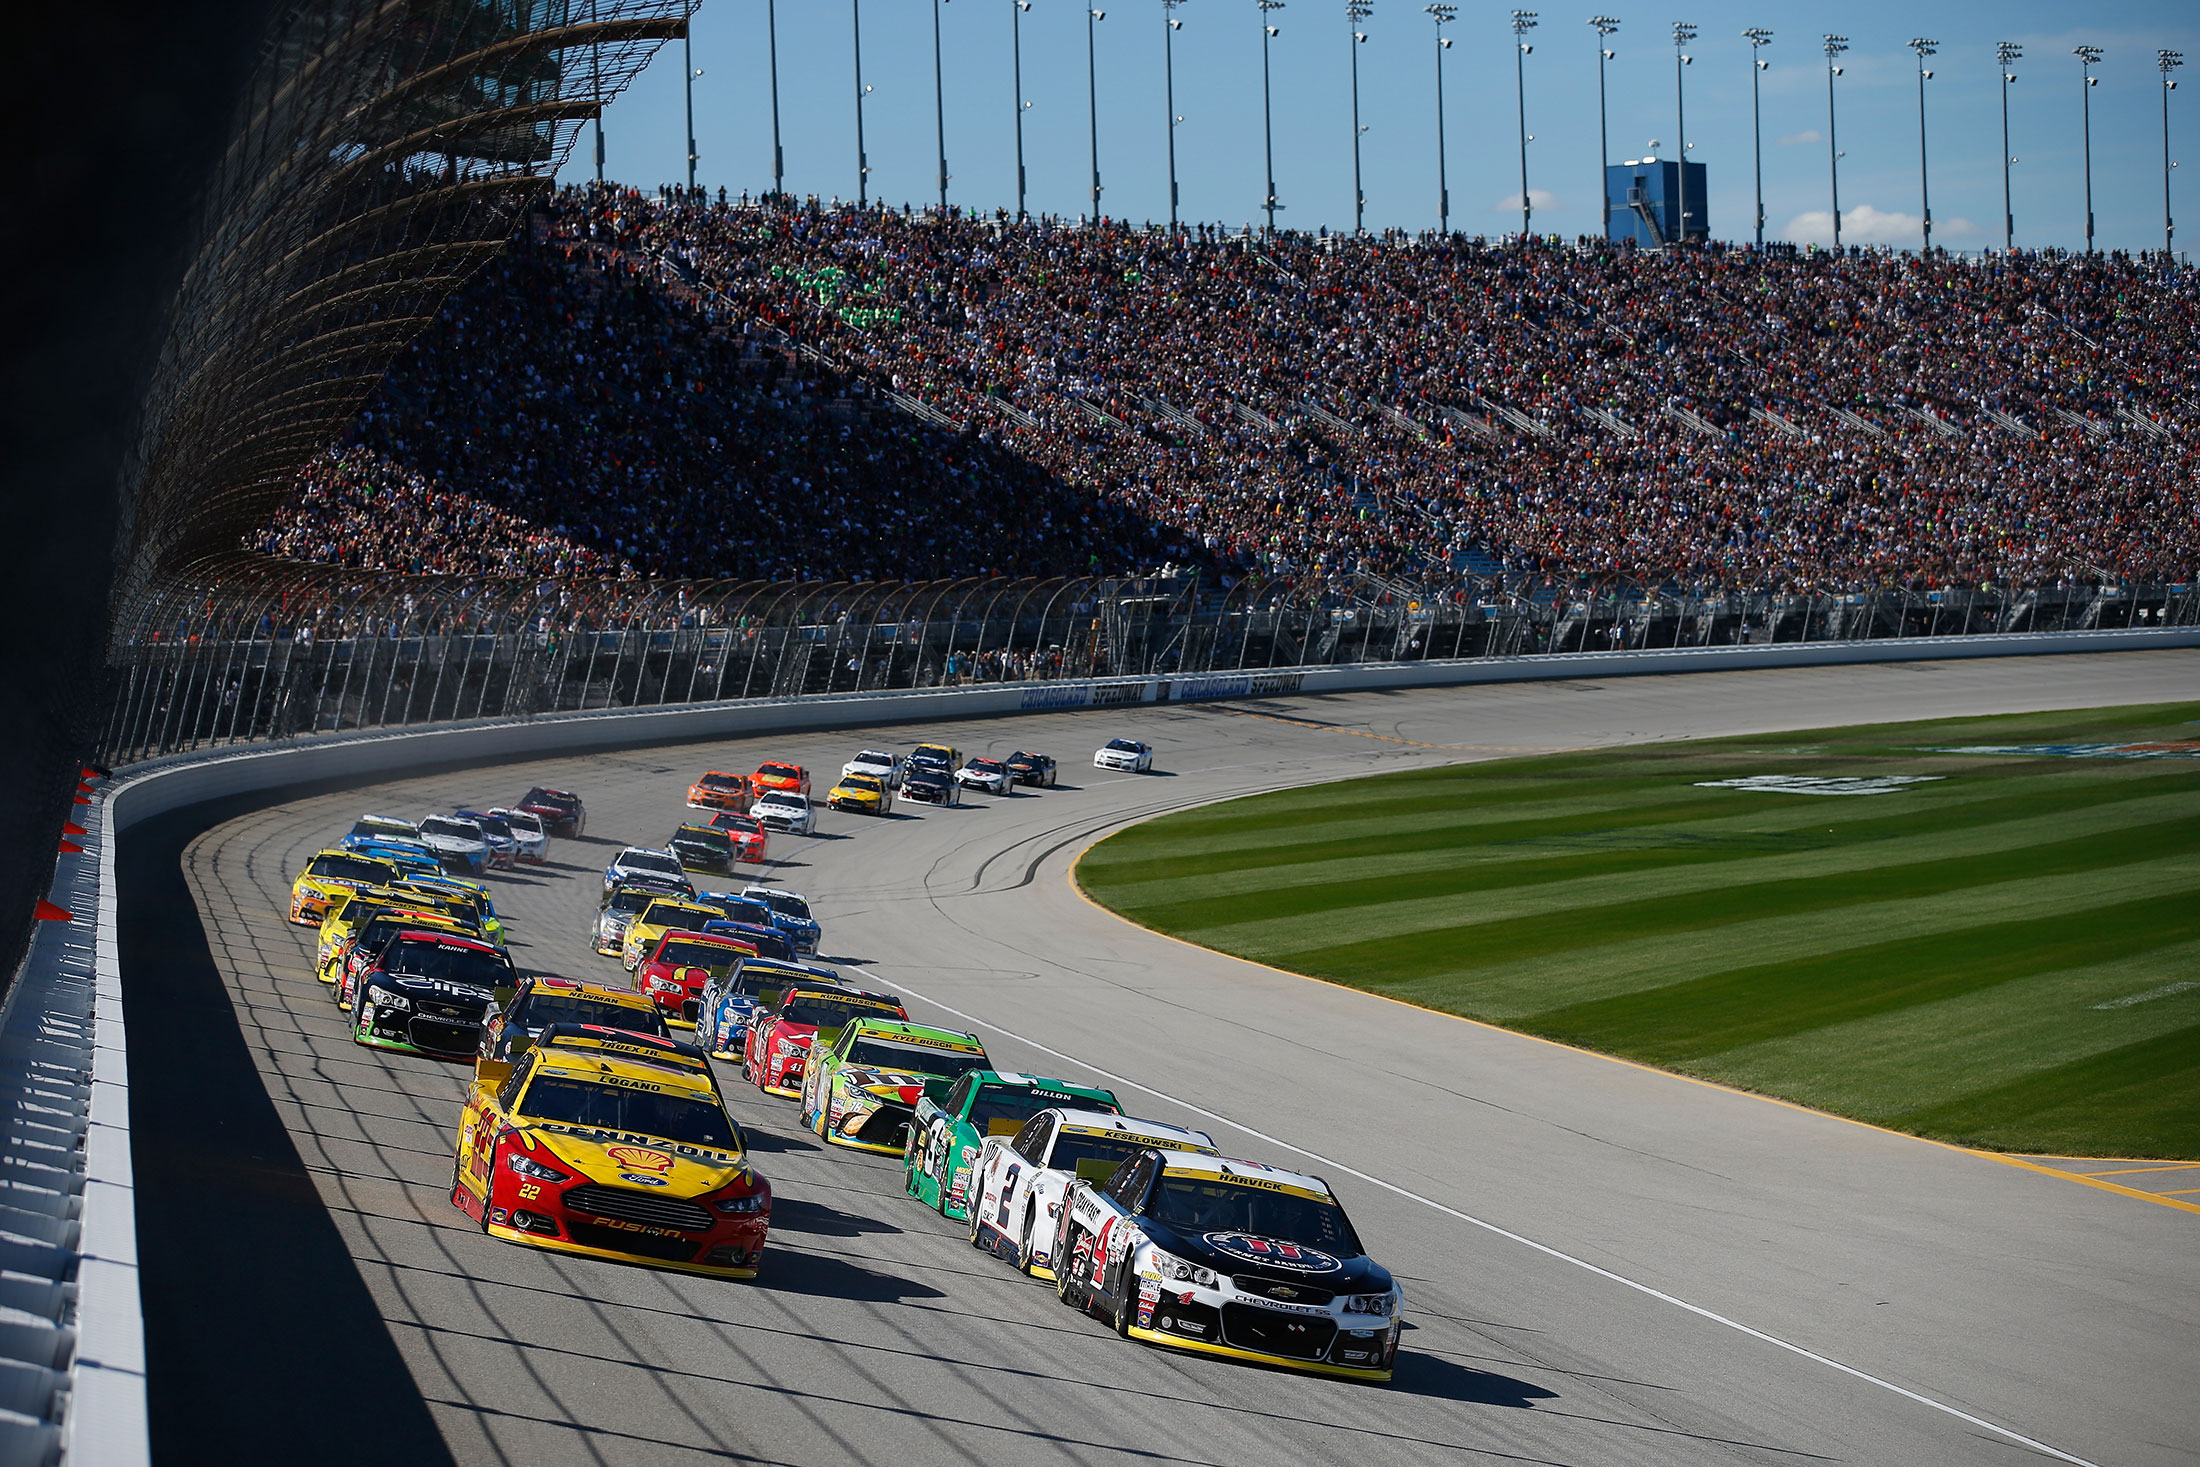 Chicagoland Speedway Home to Exciting NASCAR Action